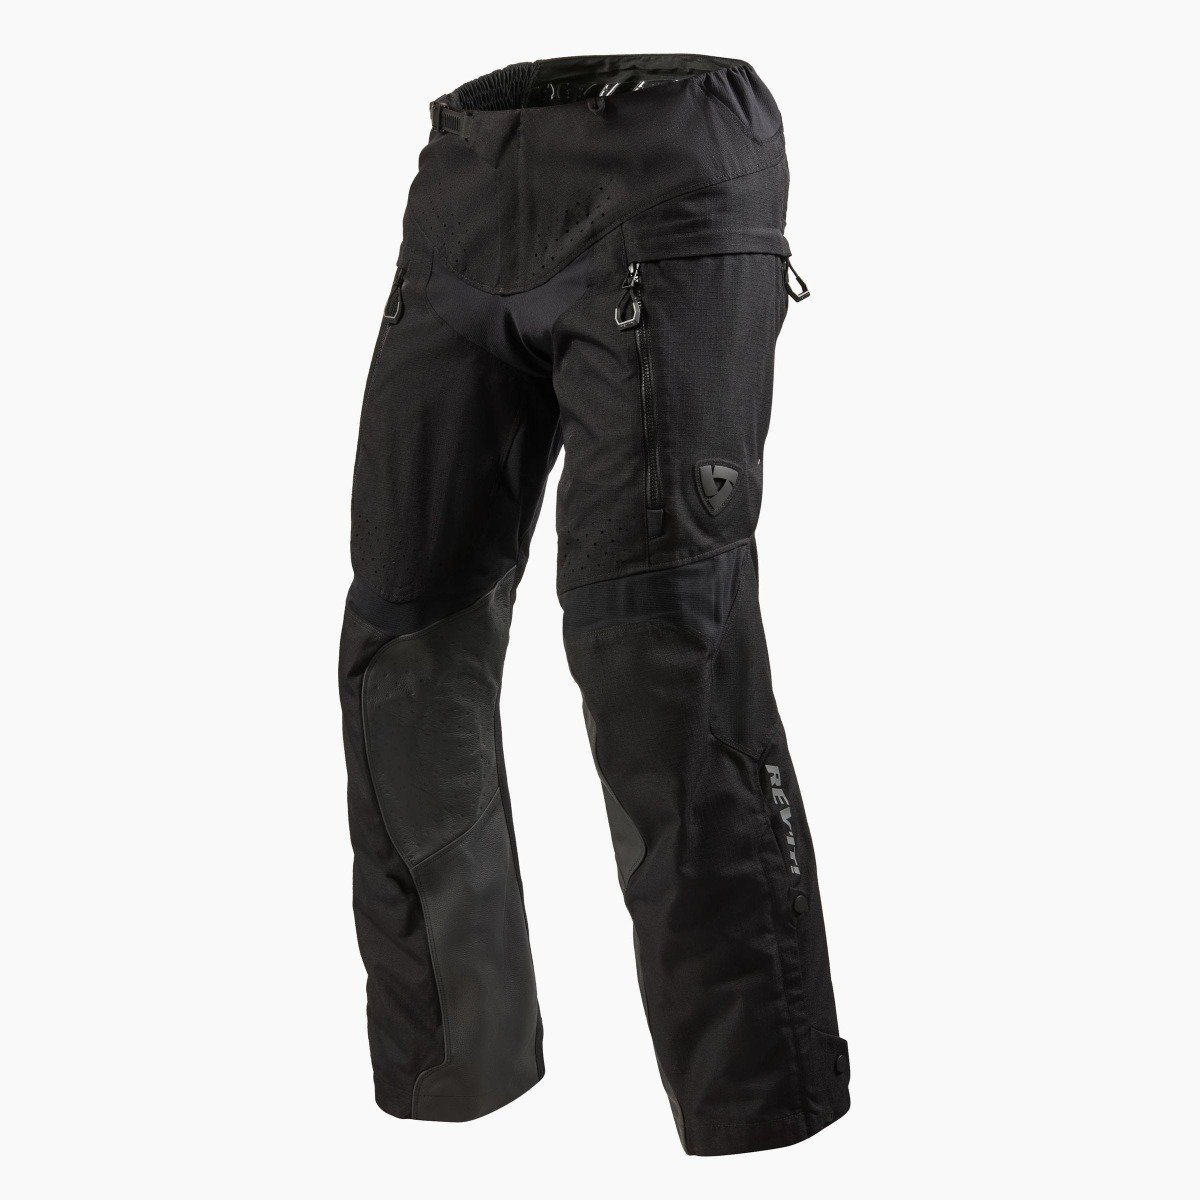 Image of REV'IT! Continent Black Motorcycle Pants Talla 2XL